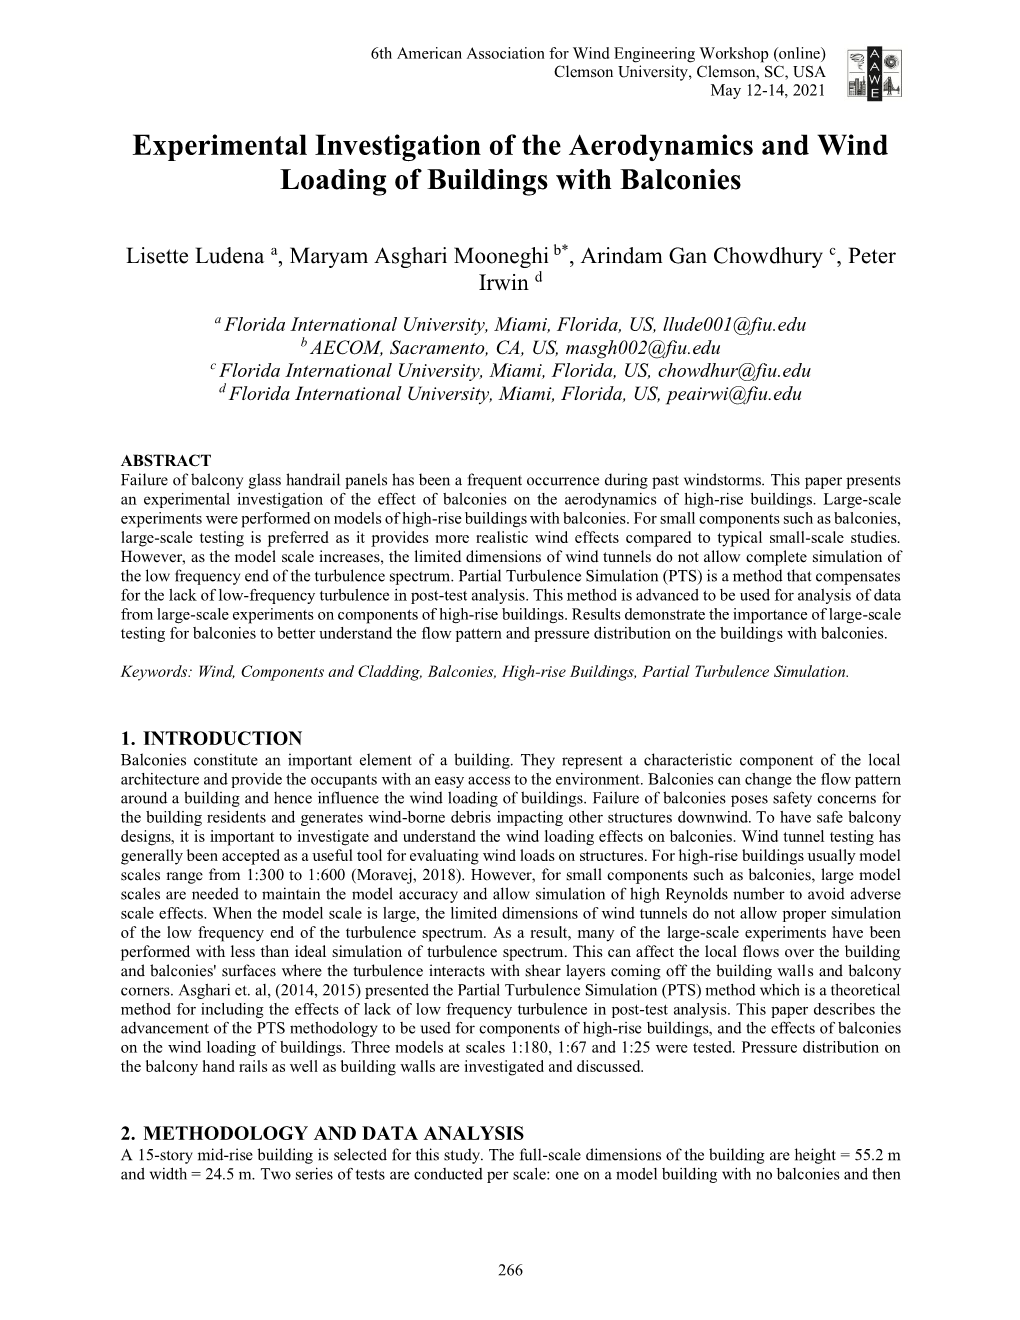 Experimental Investigation of the Aerodynamics and Wind Loading of Buildings with Balconies